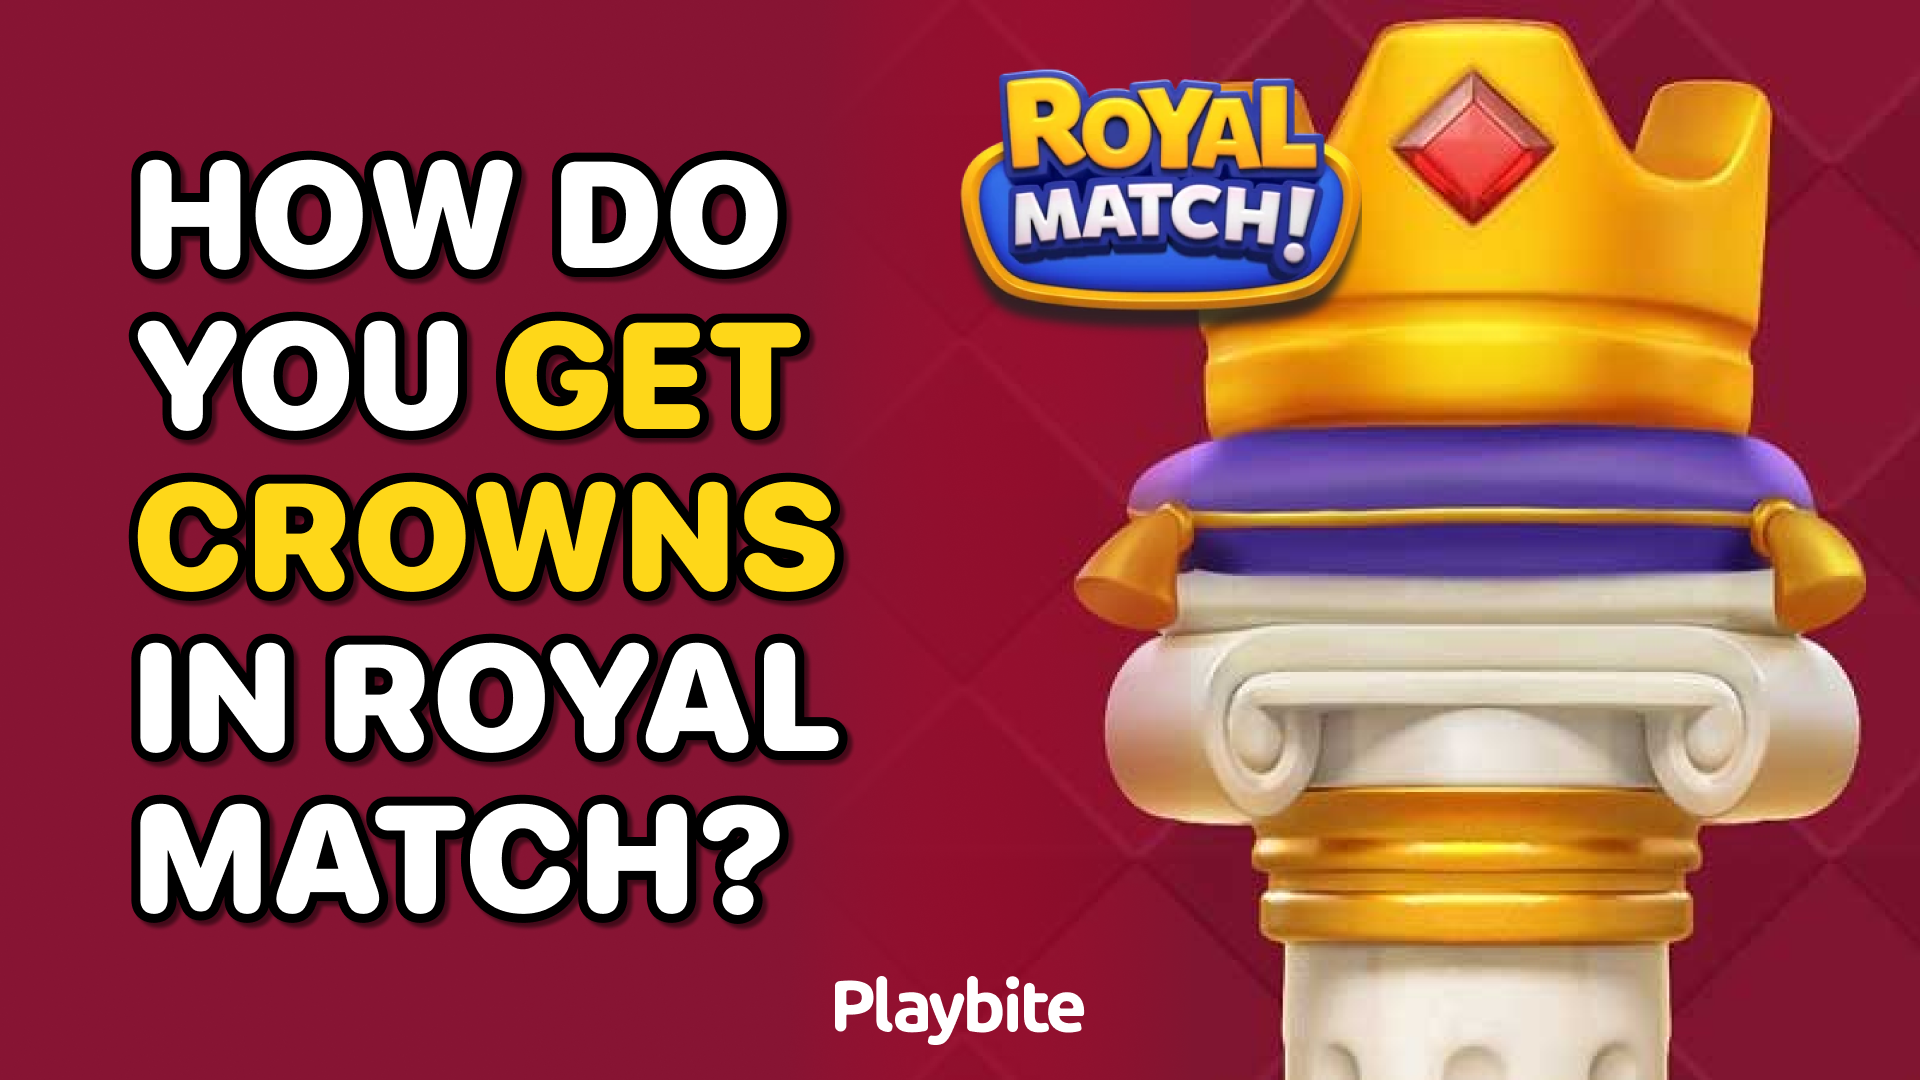 How do you get crowns in Royal Match?